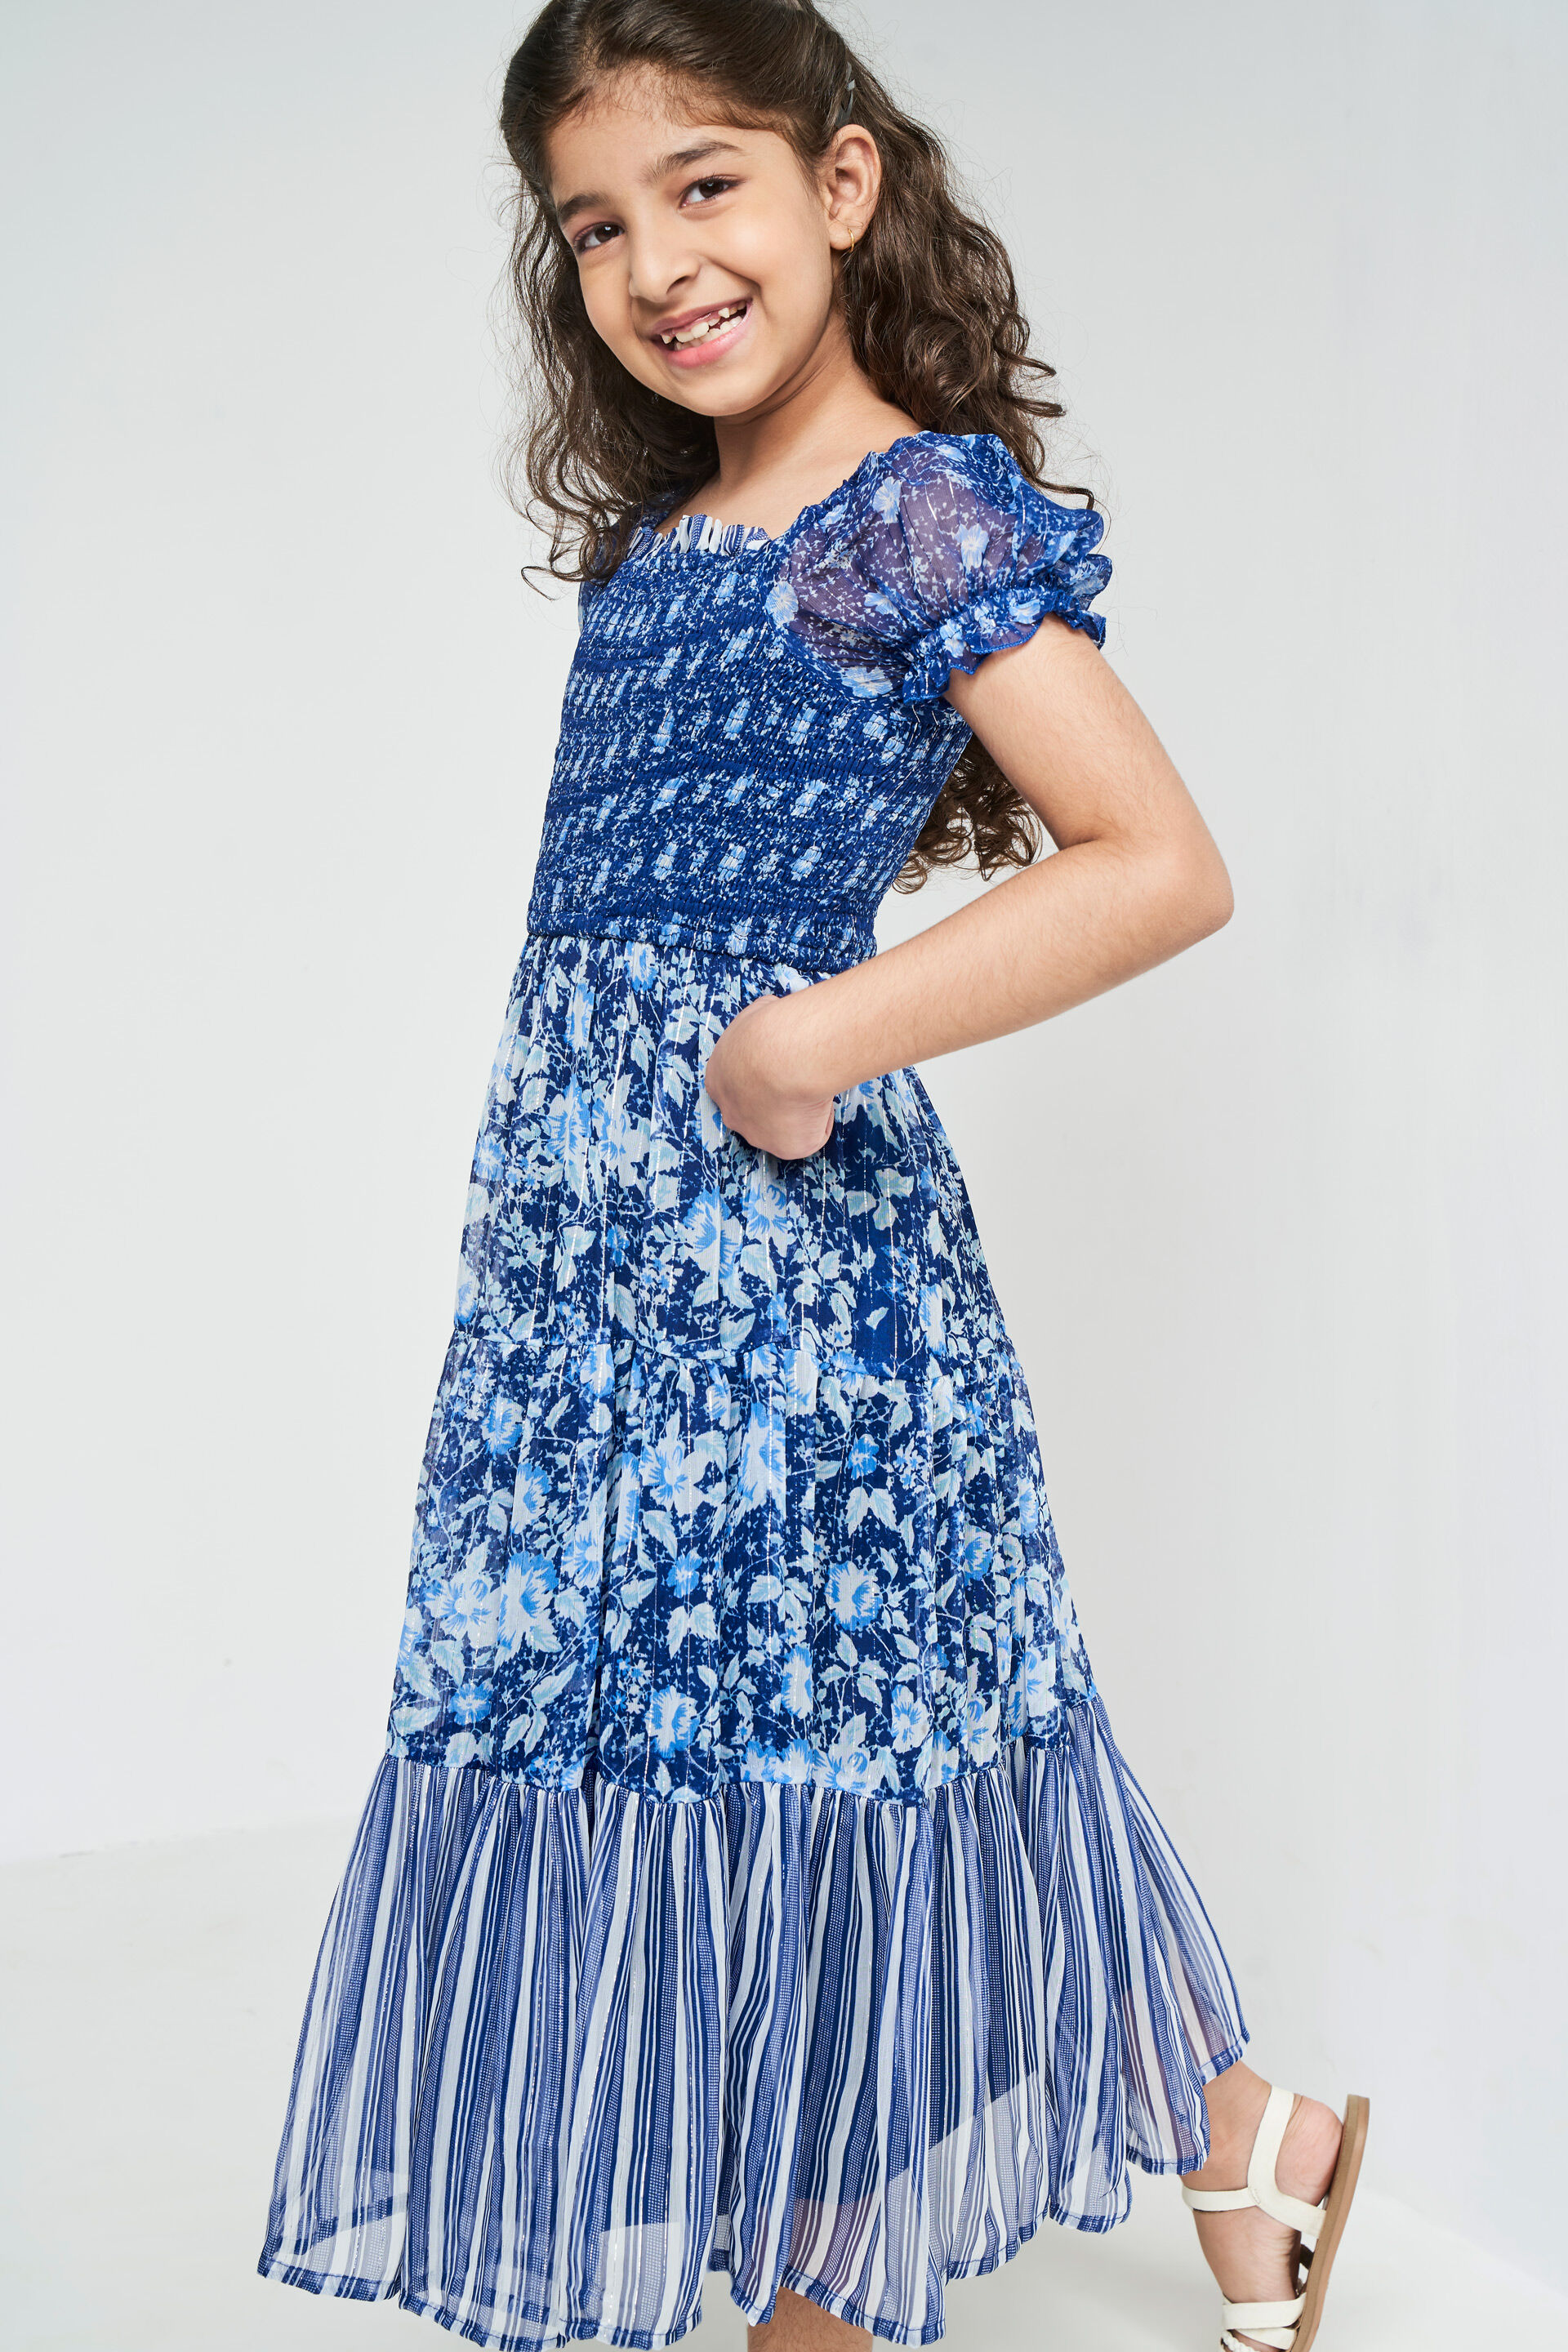 Buy Stylish Floral Satin Dresses Collection At Best Prices Online